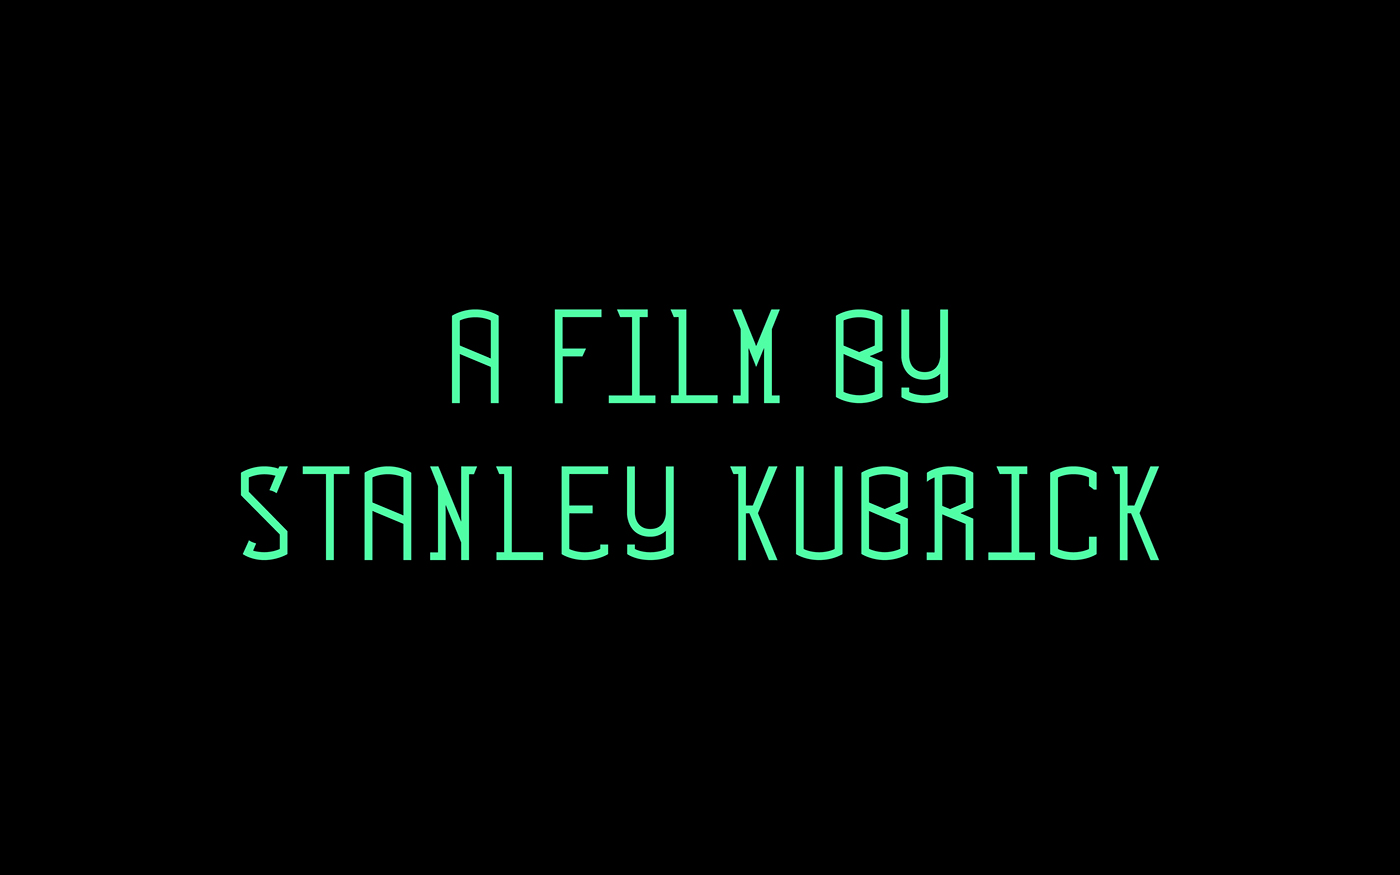 Typeface typography   space odyssey Stanley Kubrick Space  grid system adobeawards